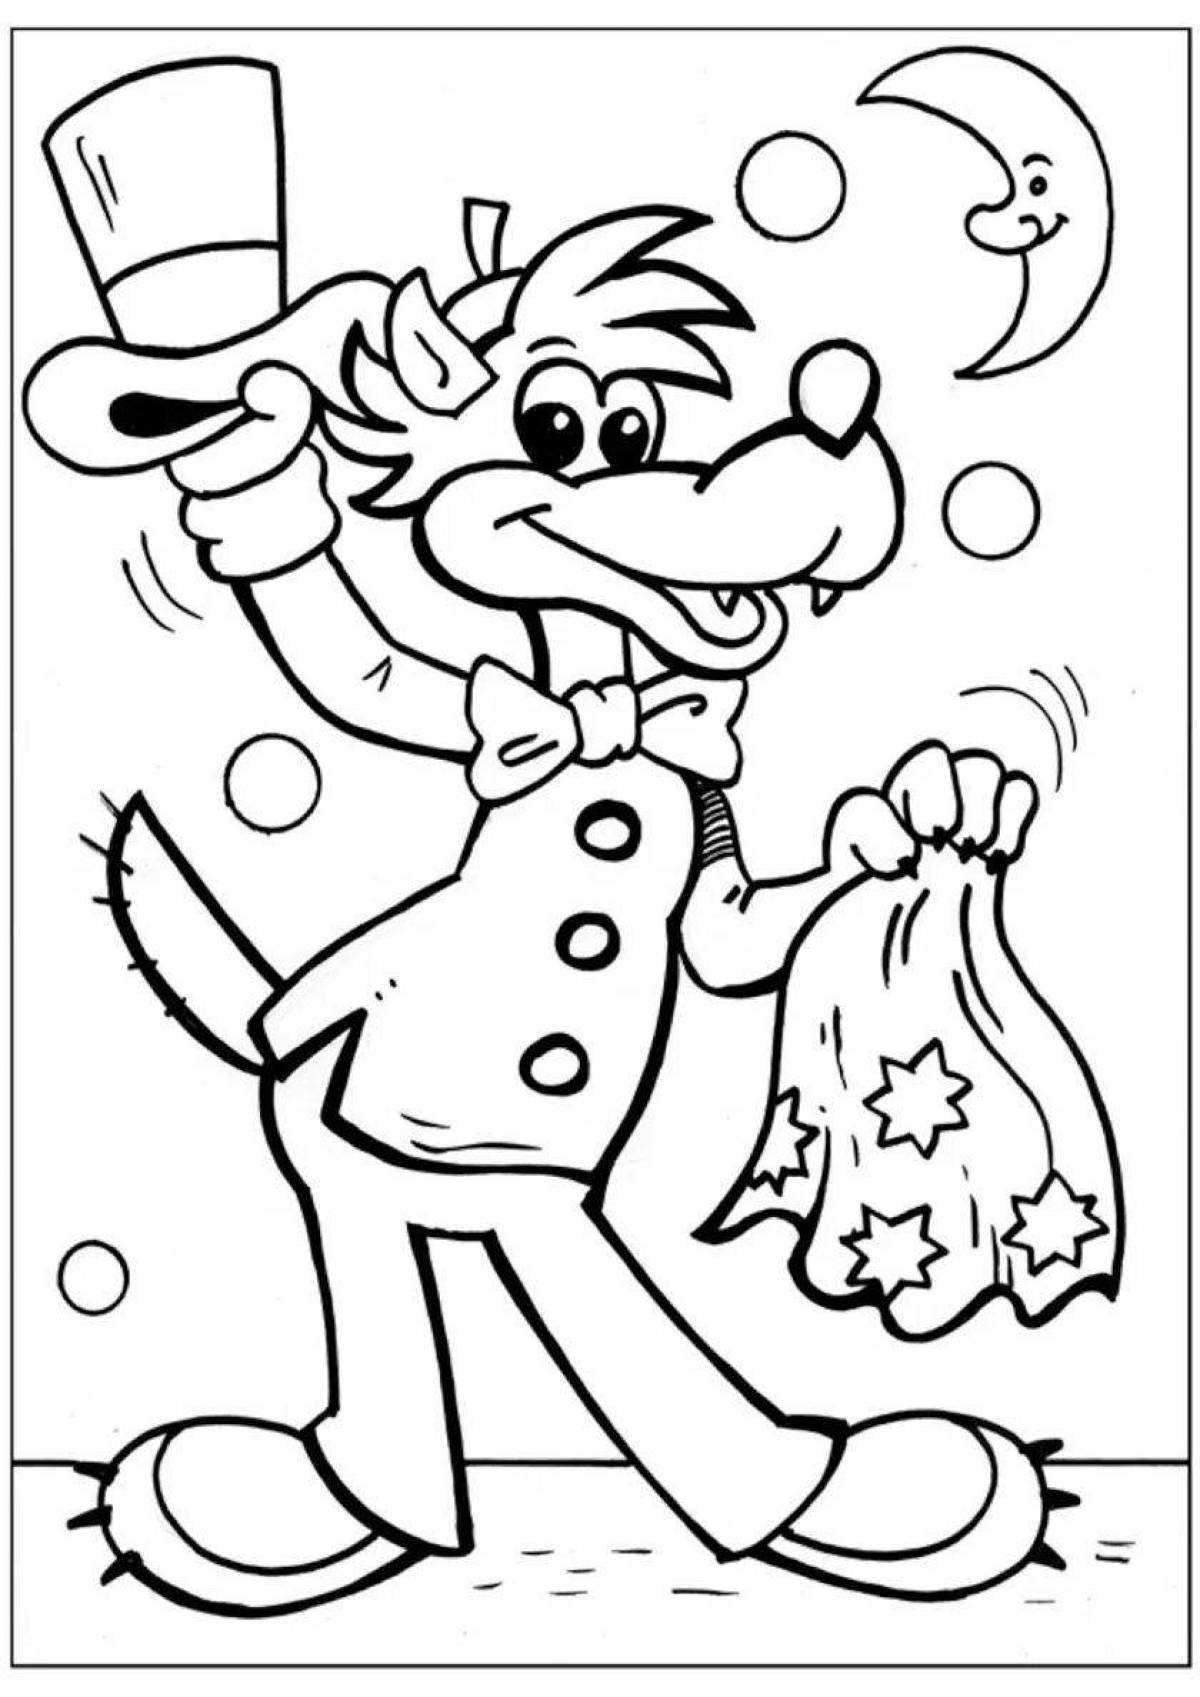 Gorgeous Christmas wolf coloring page